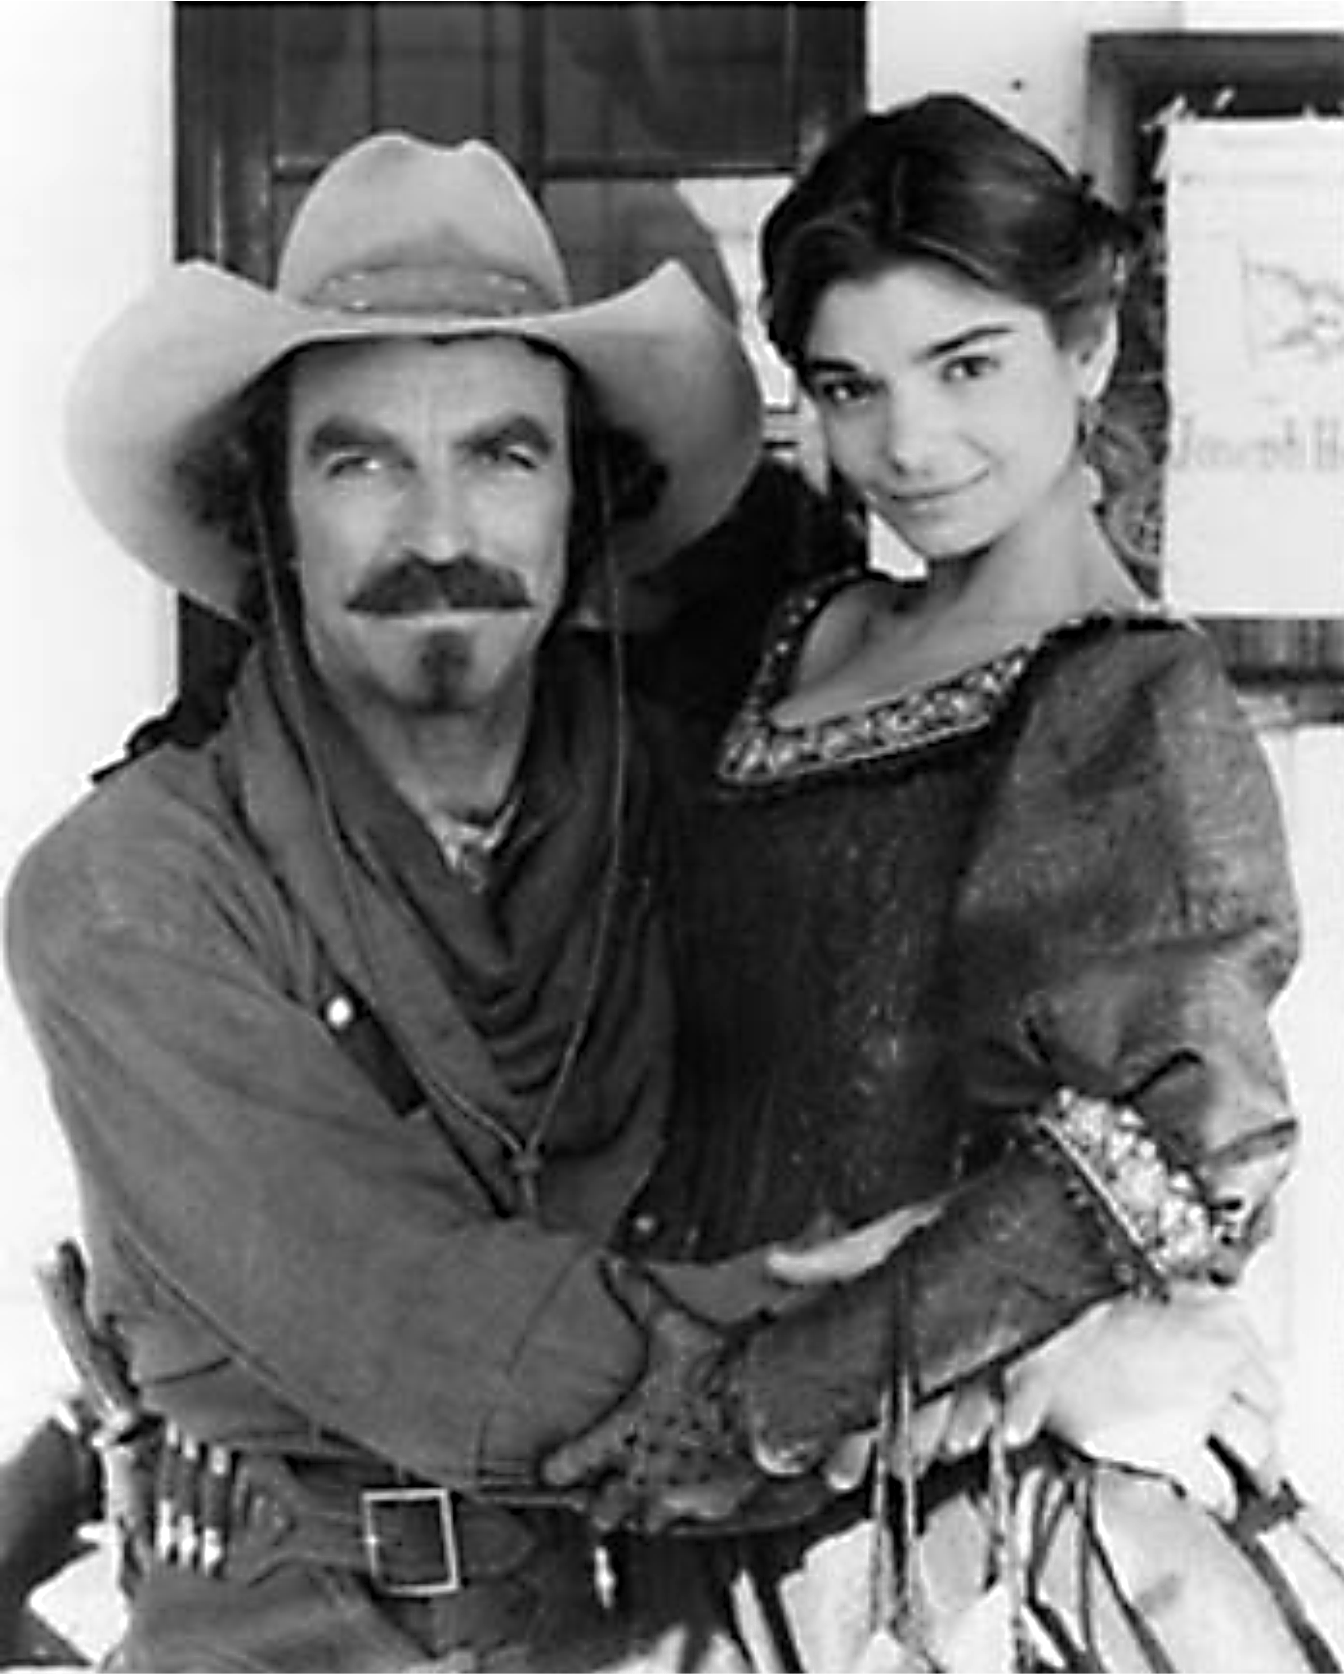 QUIGLEY DOWN UNDER Selleck with Laura San Giacomo 3